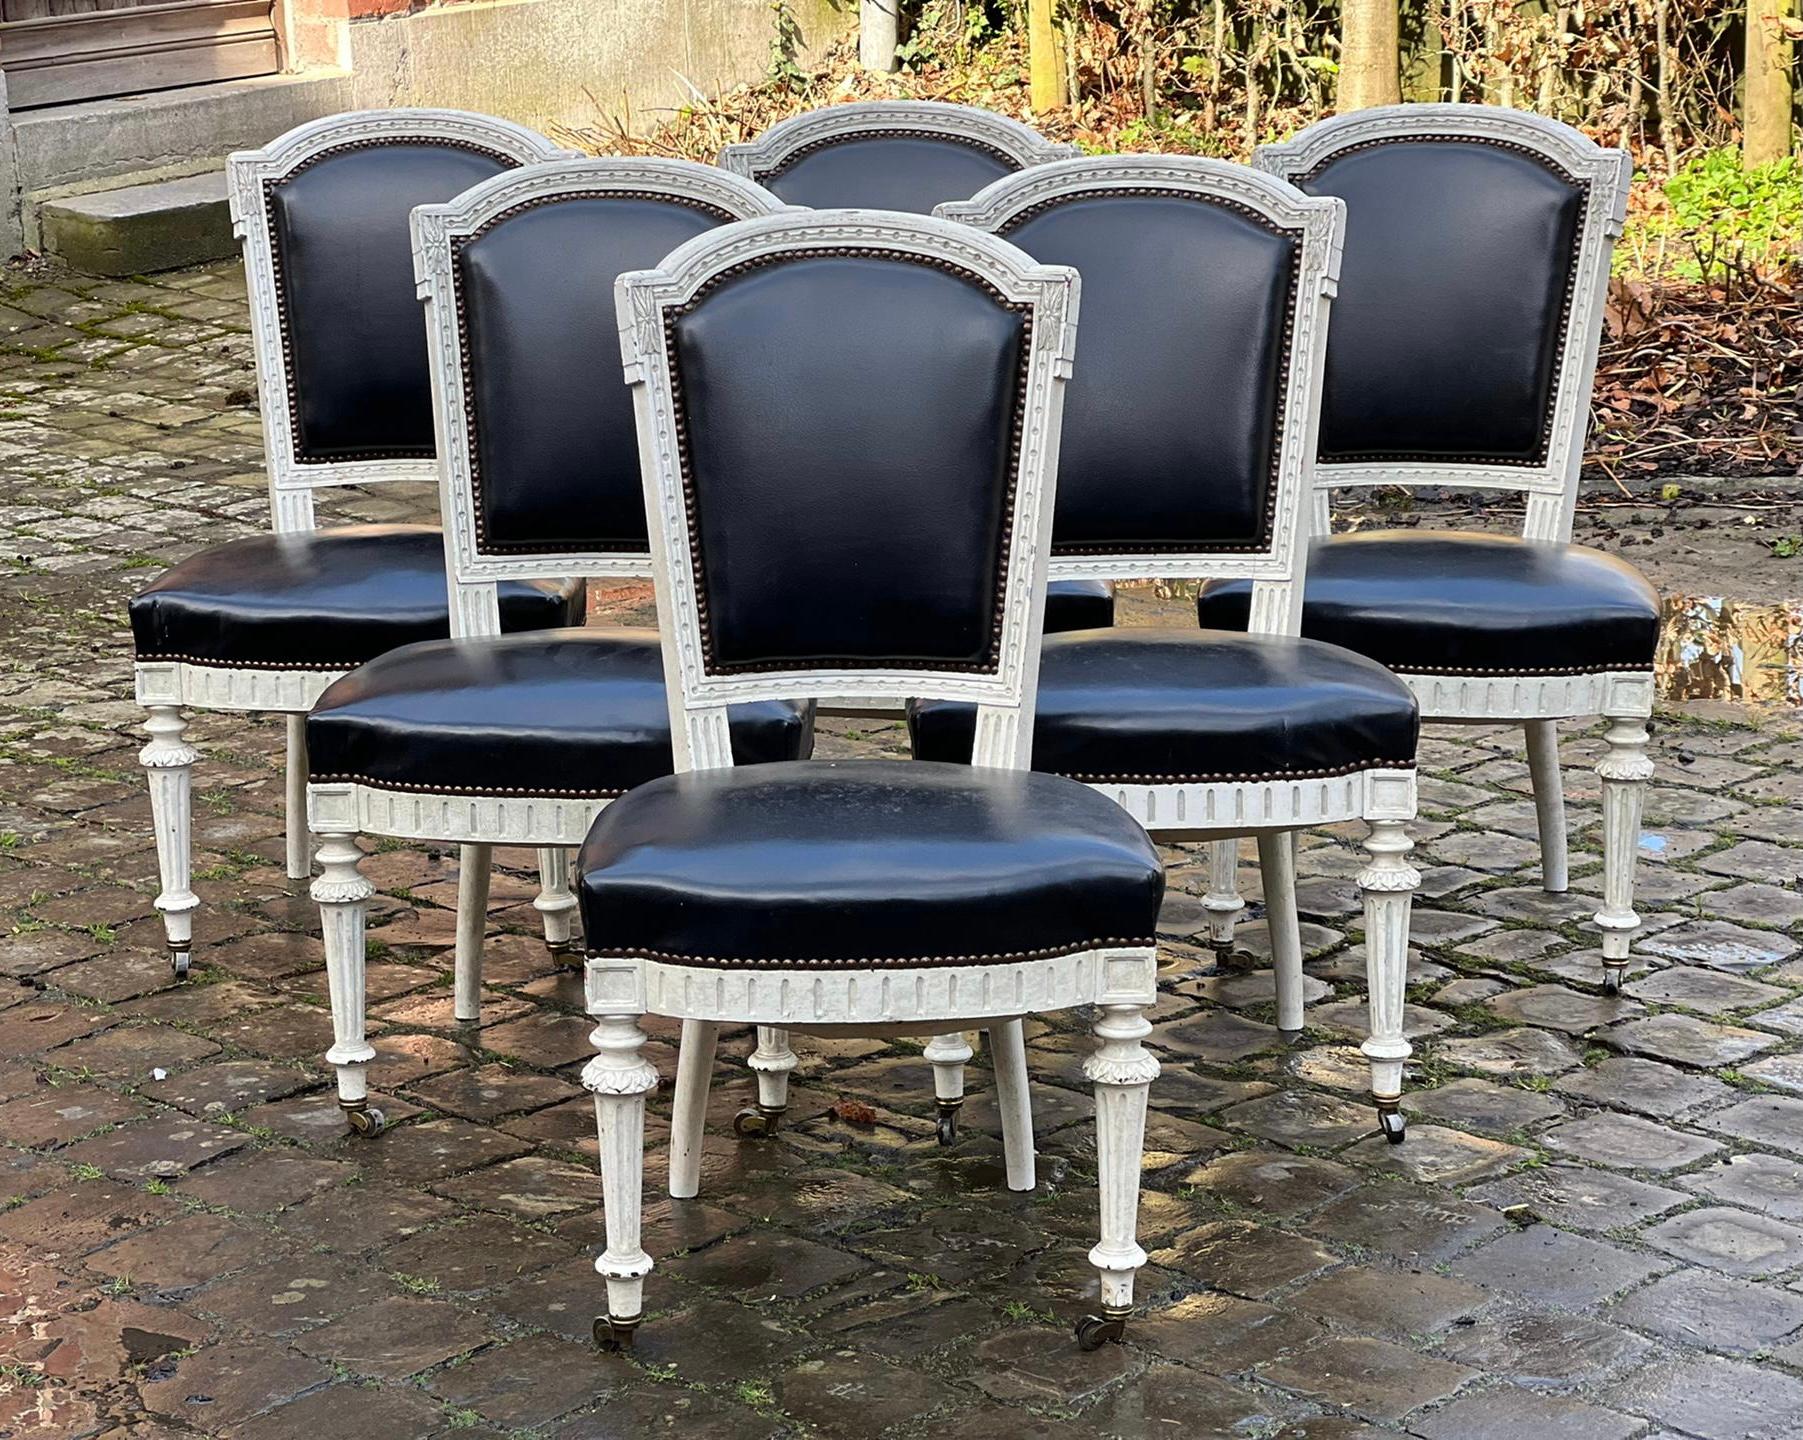 A superb quality set of 6 French dining chairs that came from an apartment in Paris. Having the original finish and patina, nice detailing and castors on the front legs (always a sign of quality). The upholstery is in excellent condition and the